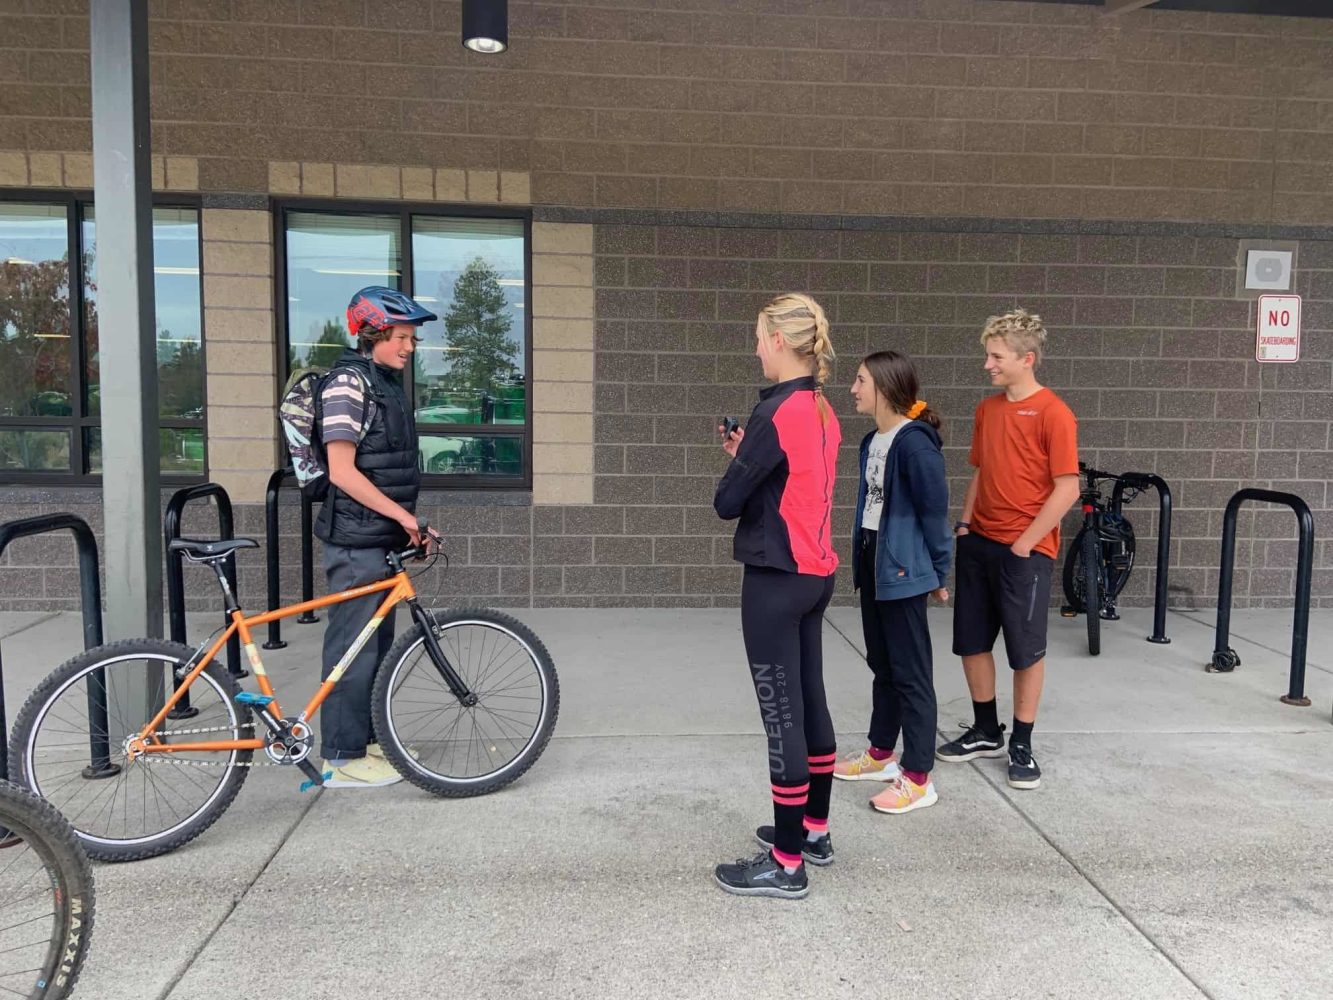 students talk with their peer riding his bike